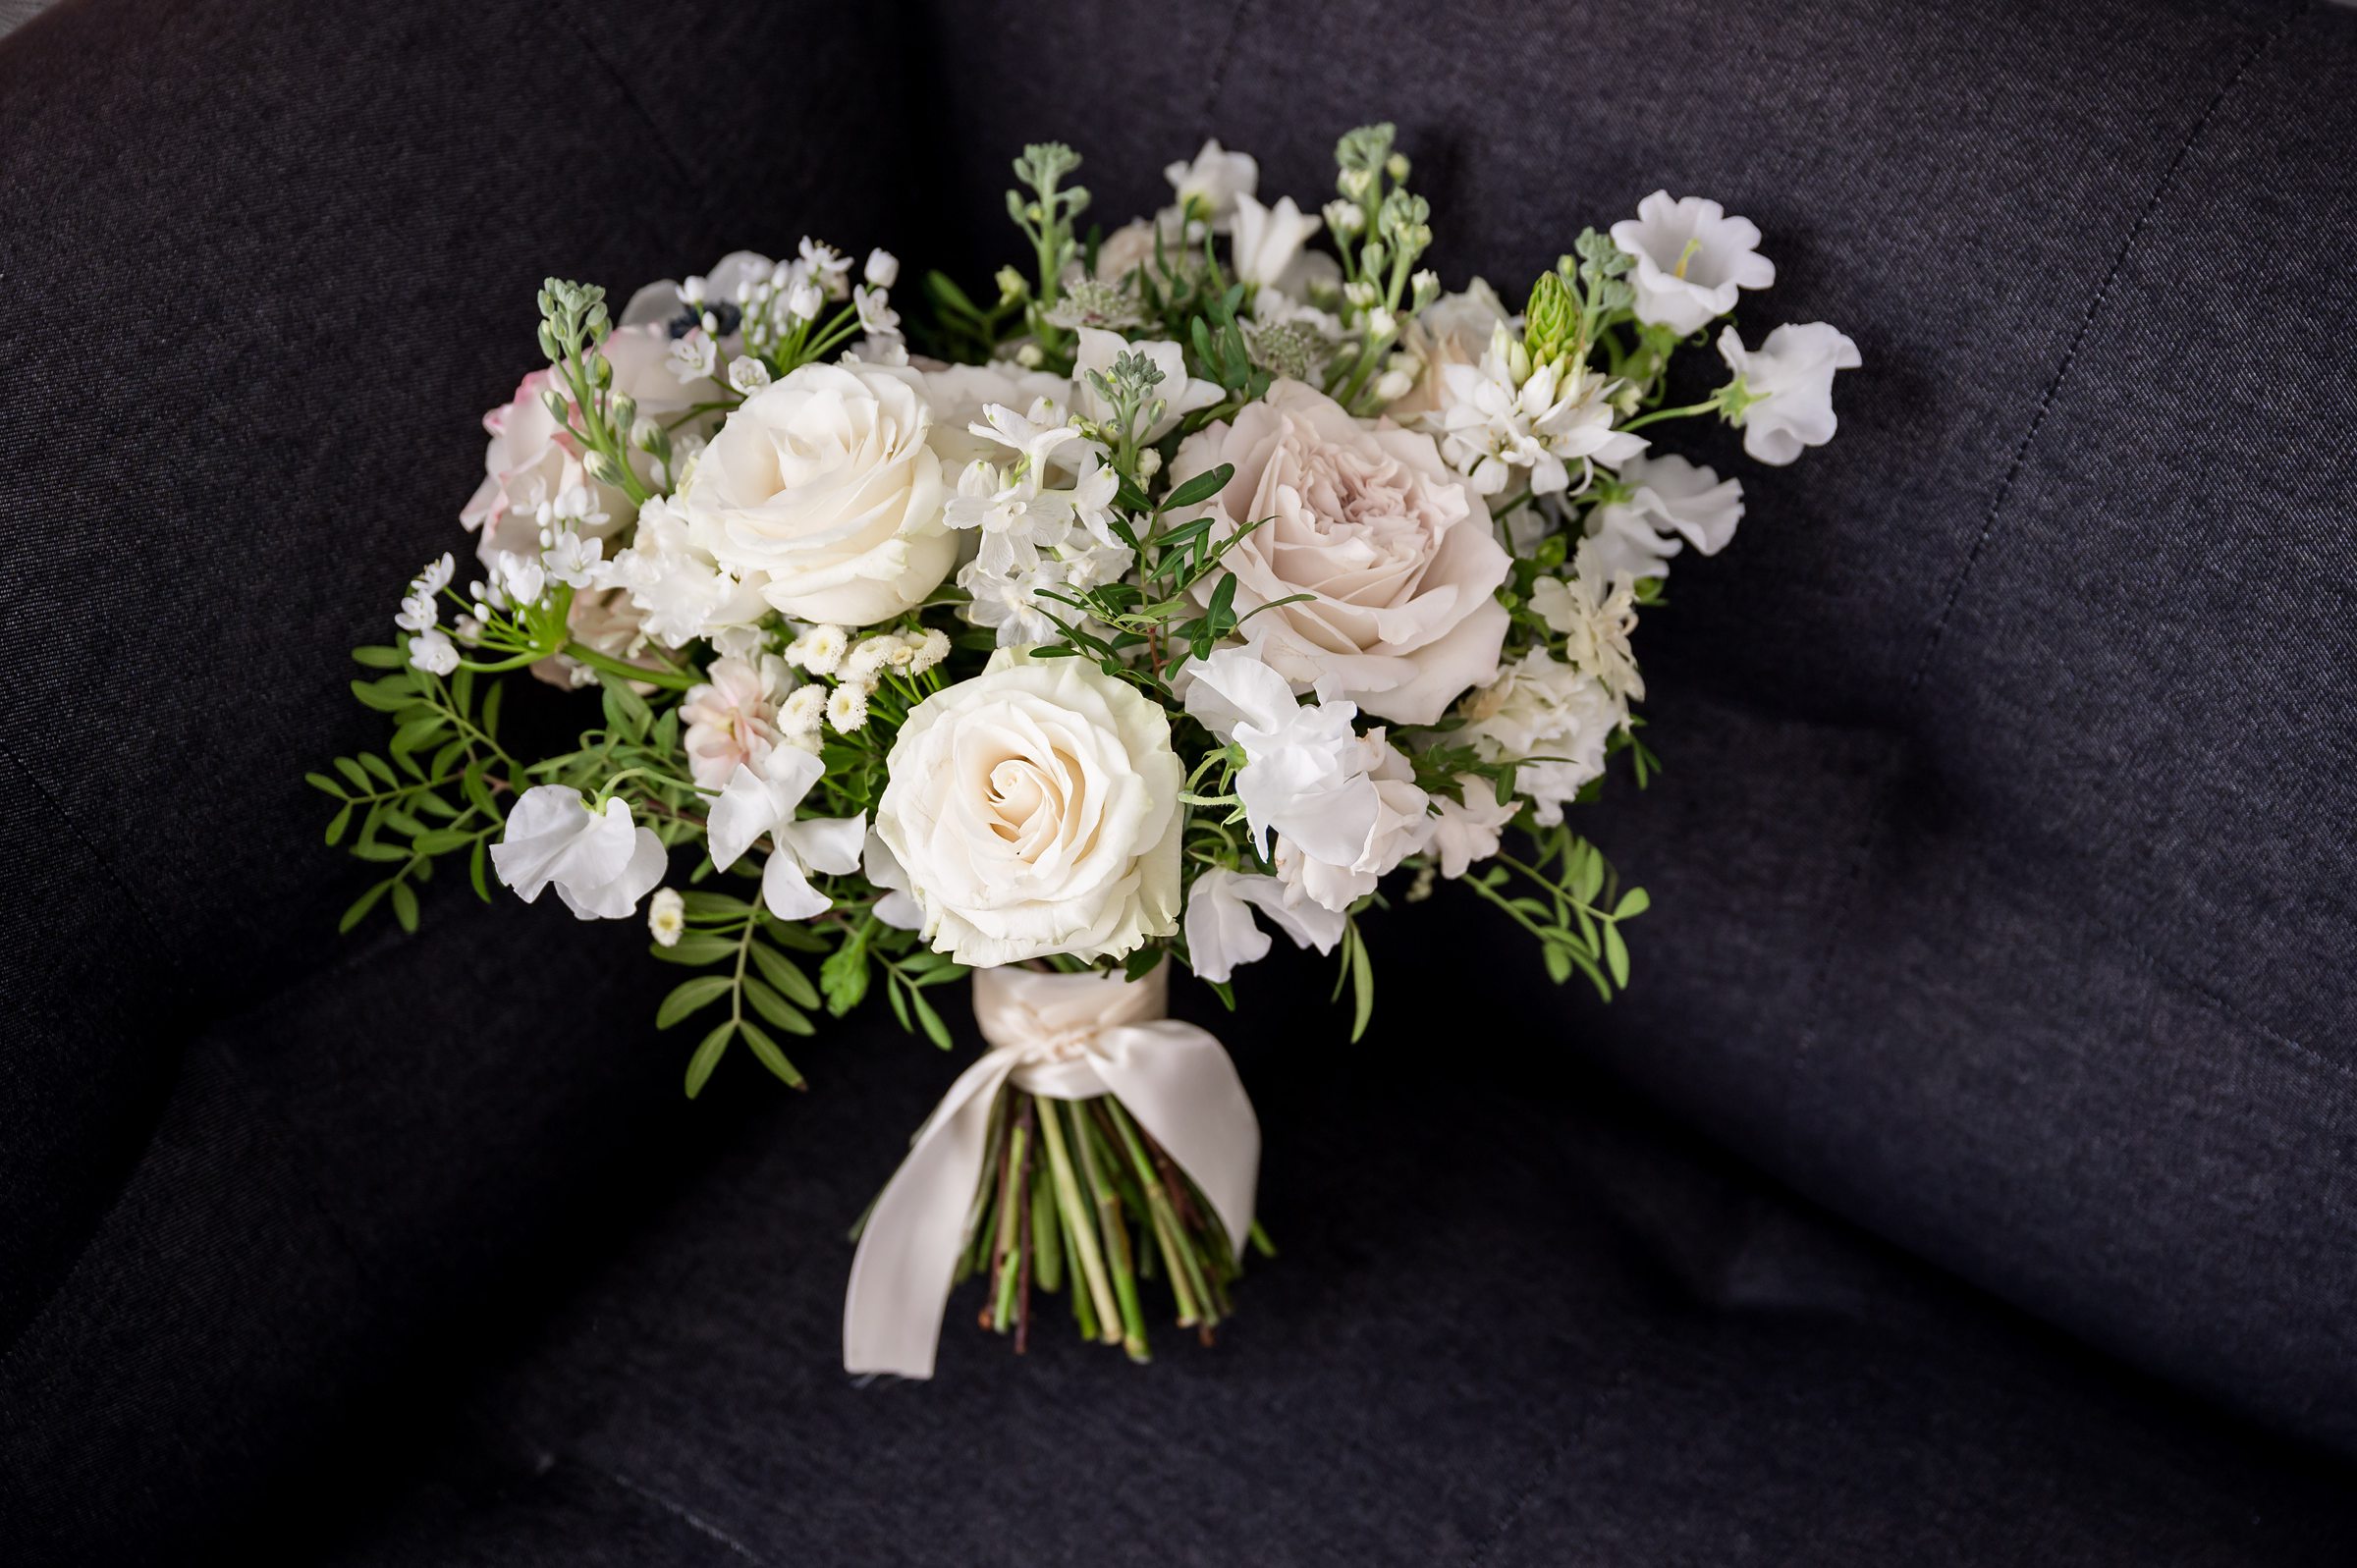 At Lilah Events, a bouquet of white and pink flowers elegantly decorates a gray couch.